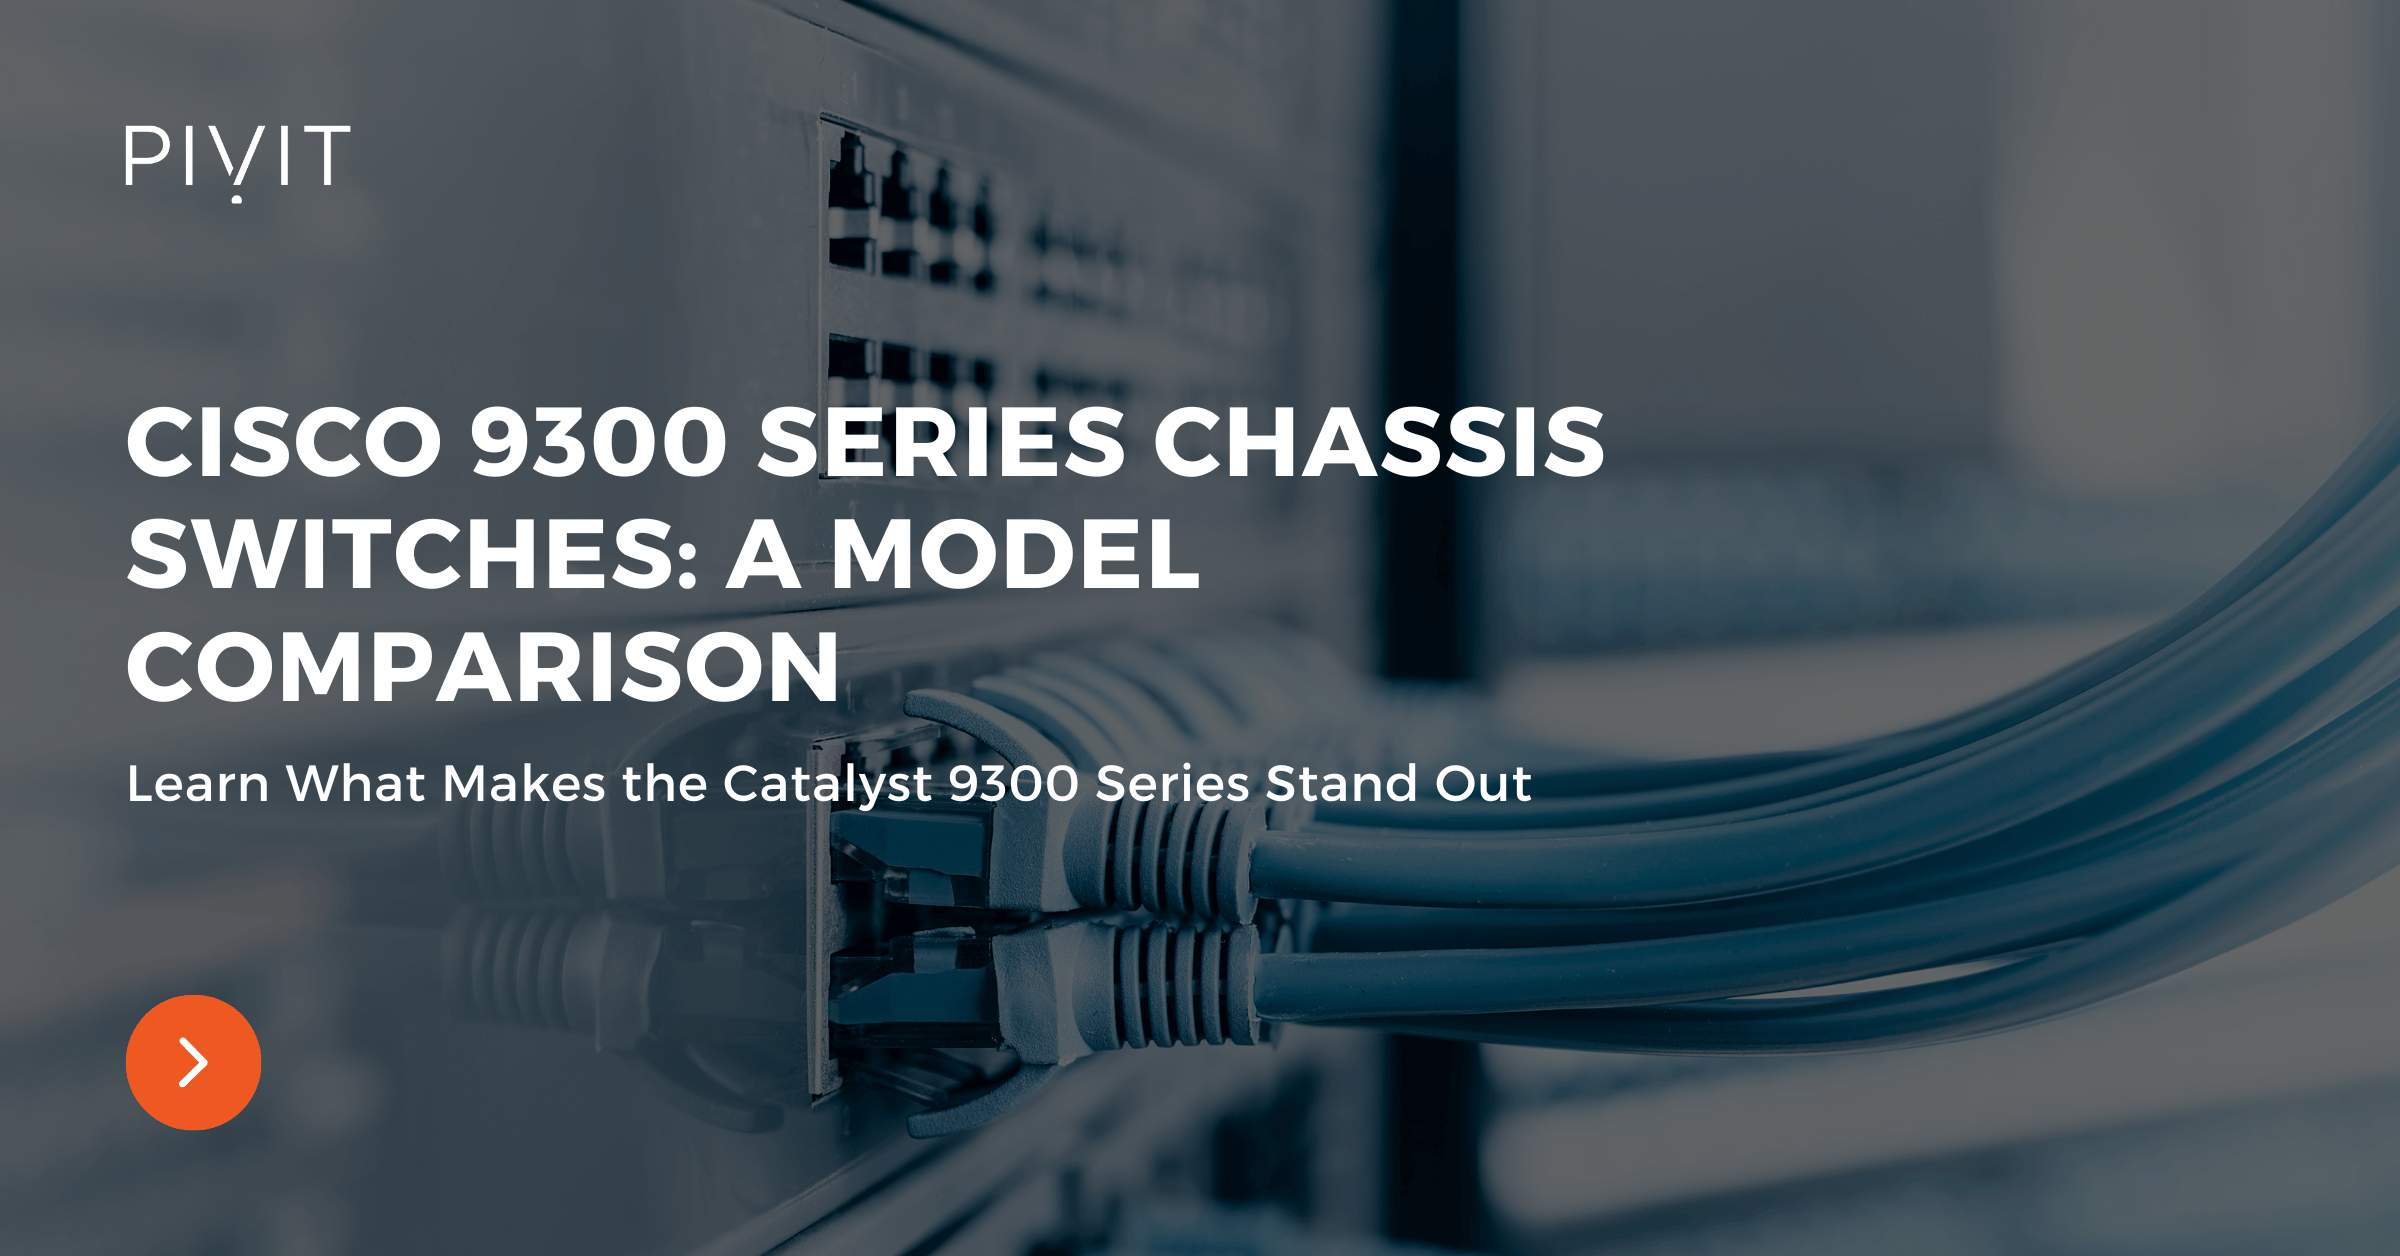 Cisco 9300 Series Chassis Switches: A Model Comparison - Learn What Makes the Catalyst 9300 Series Stand Out